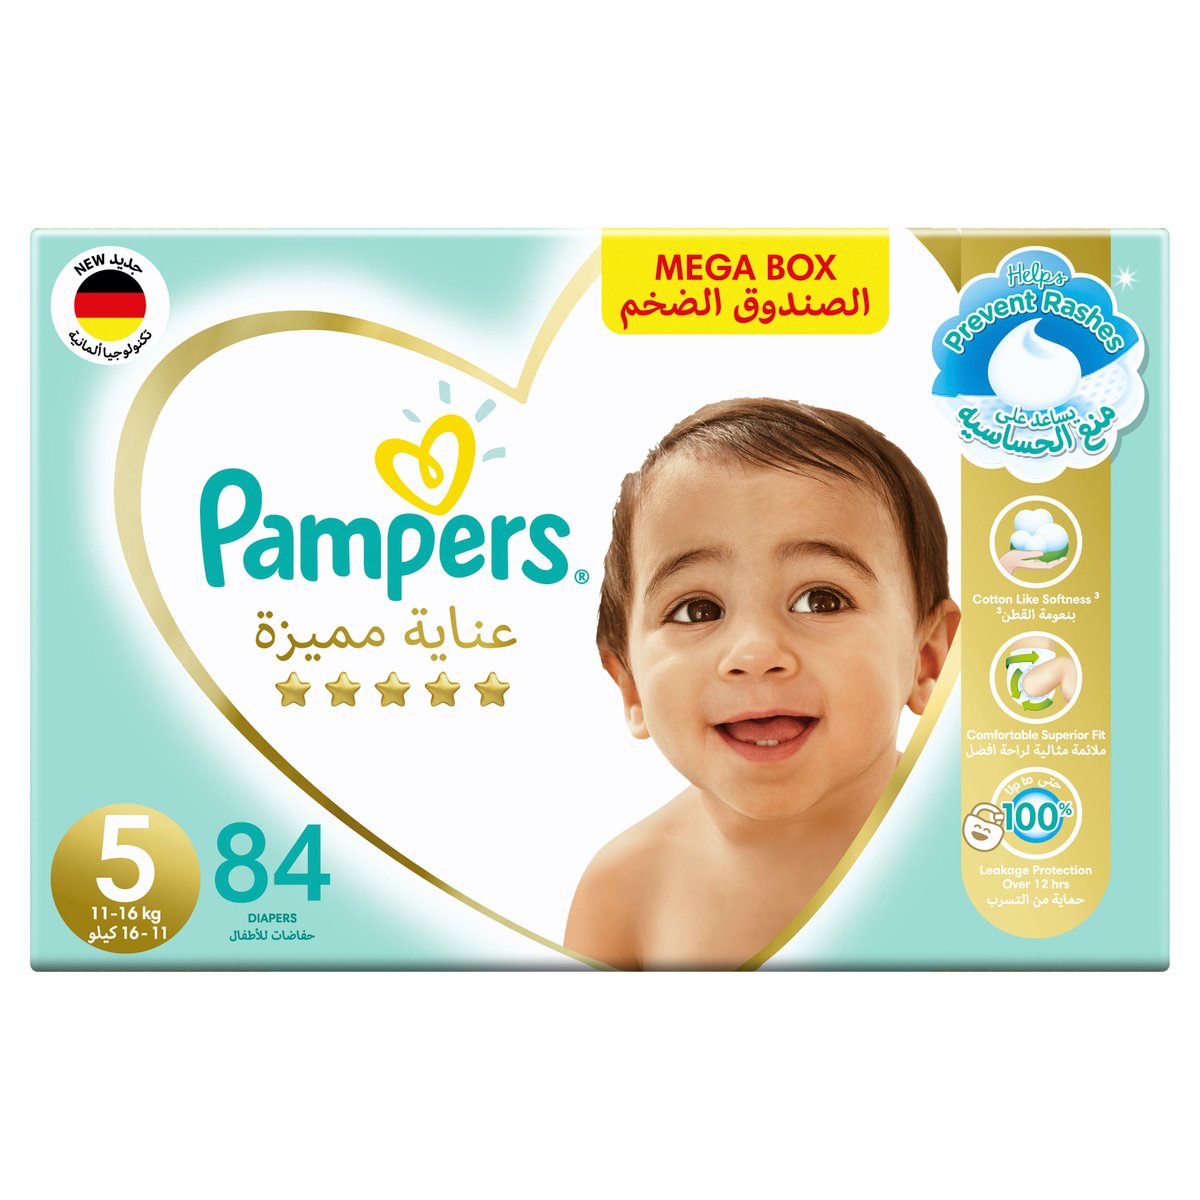 Pampers Premium Care Diapers Size 5, 11-16kg The Softest Diaper 84pcs